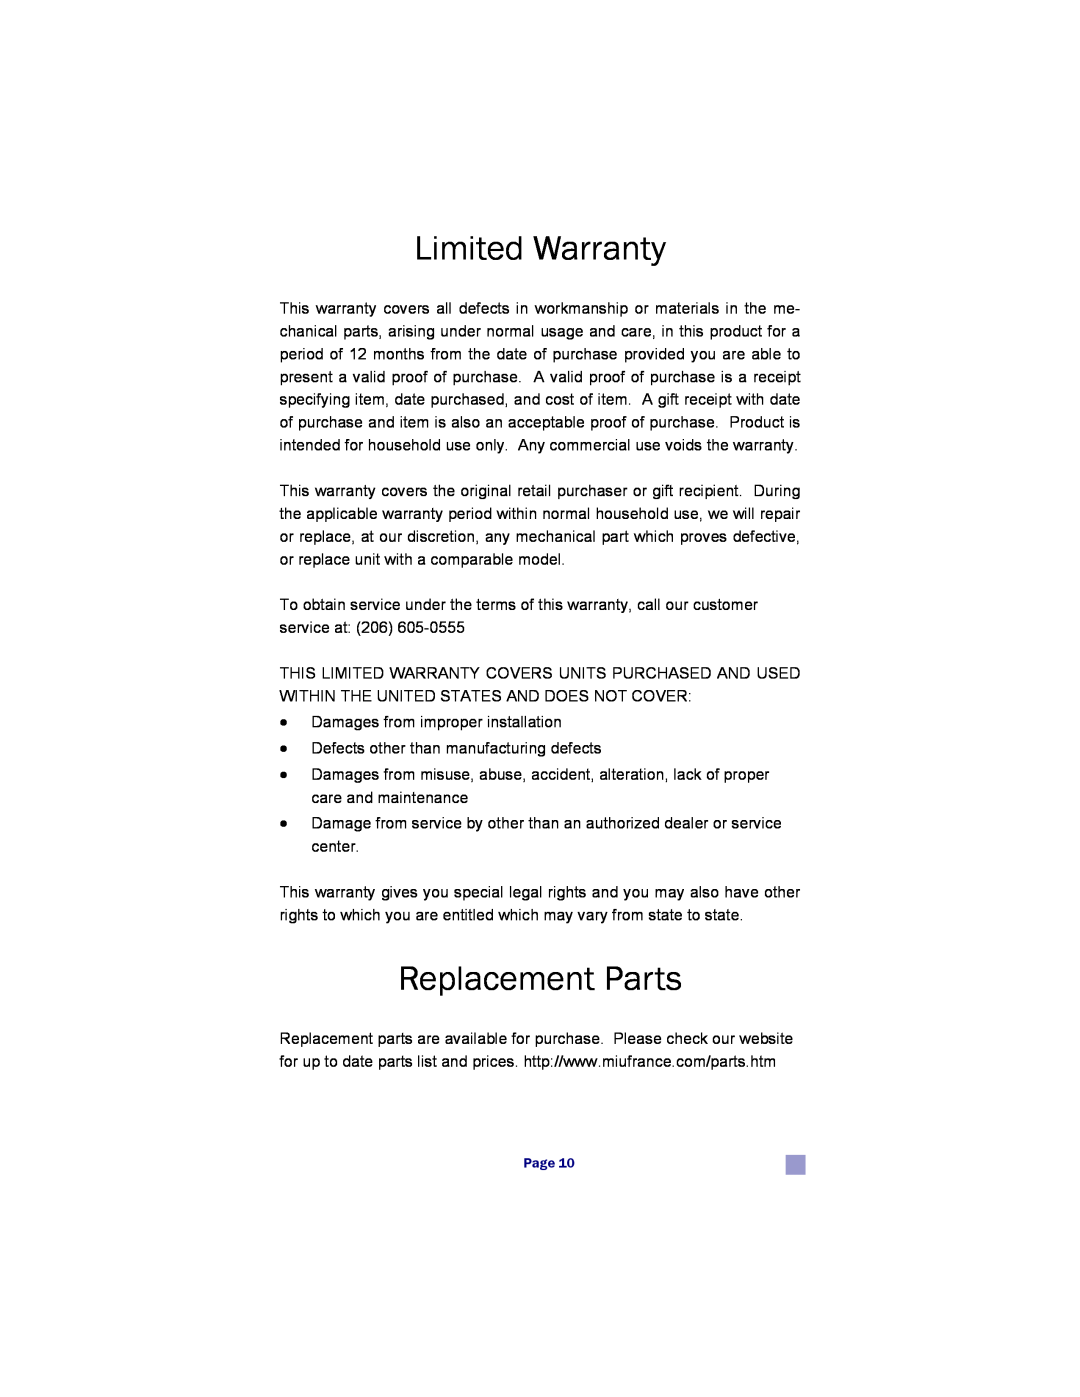 MIU France 90777 manual Limited Warranty, Replacement Parts 